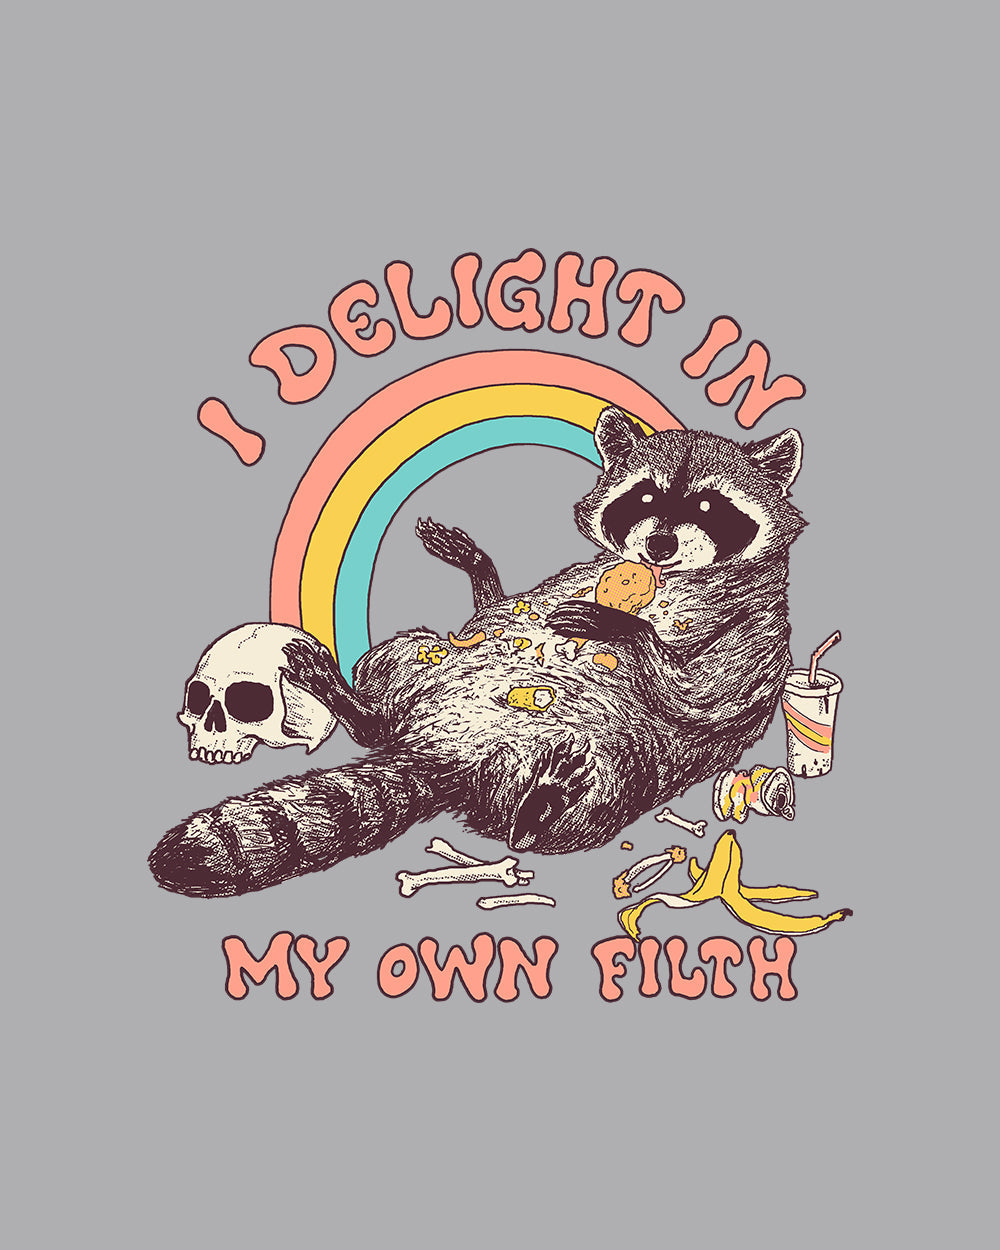 I Delight in My Own Filth Sweater Australia Online #colour_grey